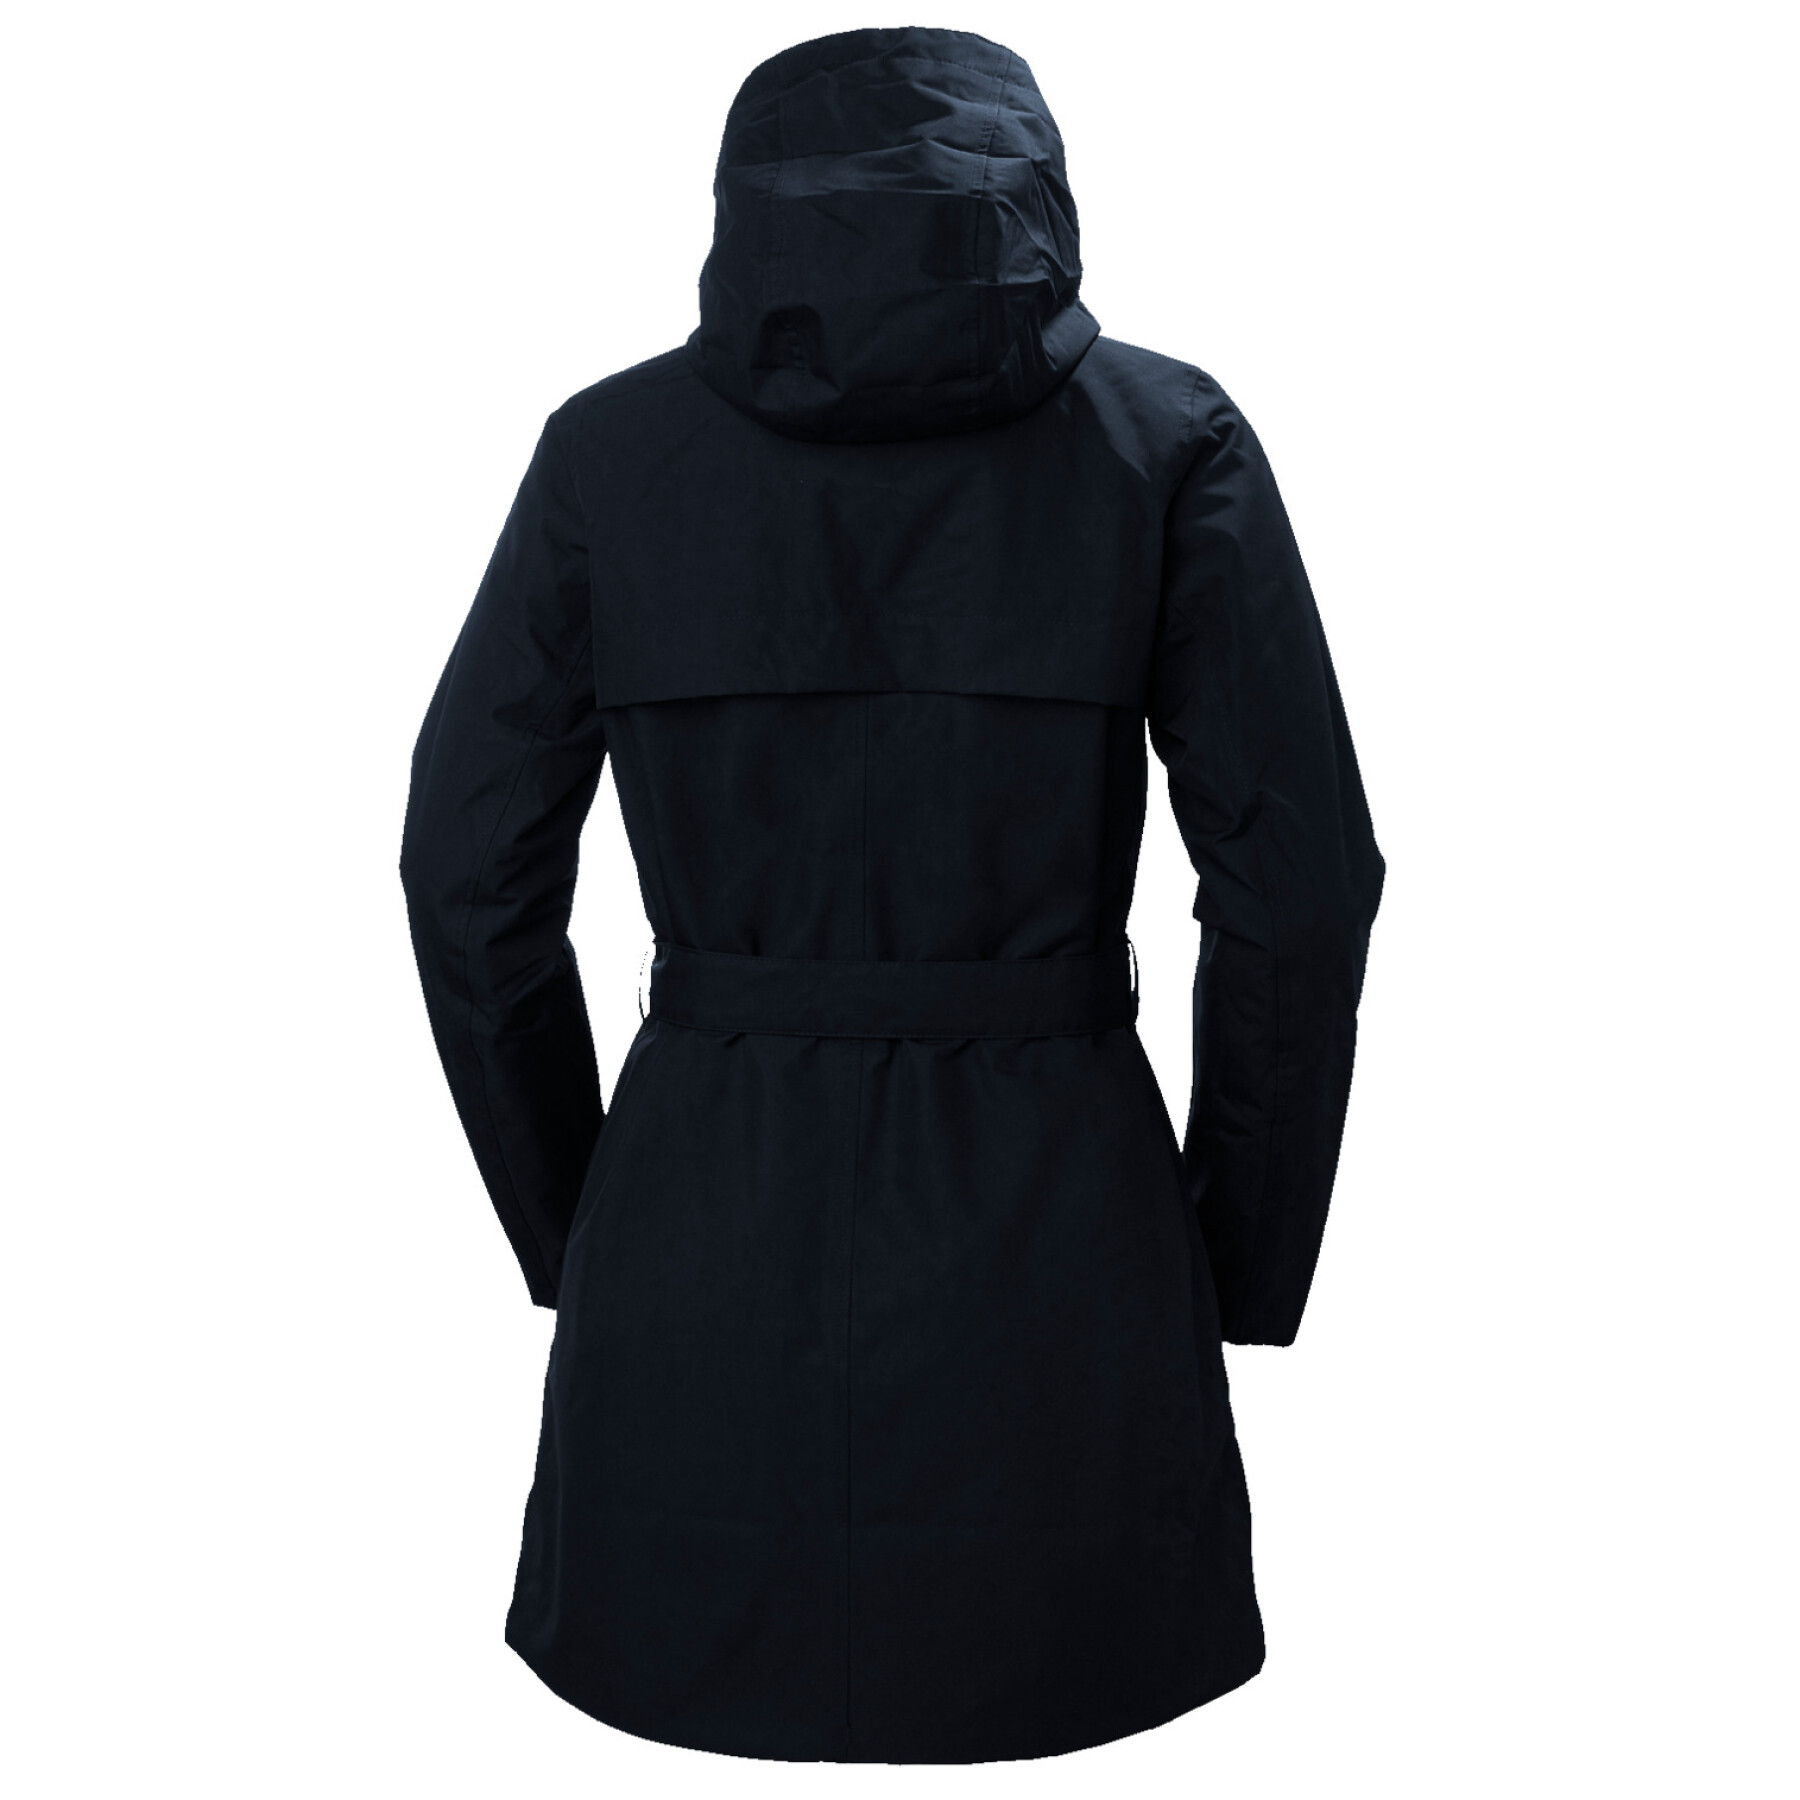 Manteau femme Helly Hansen welsey II trench insulated